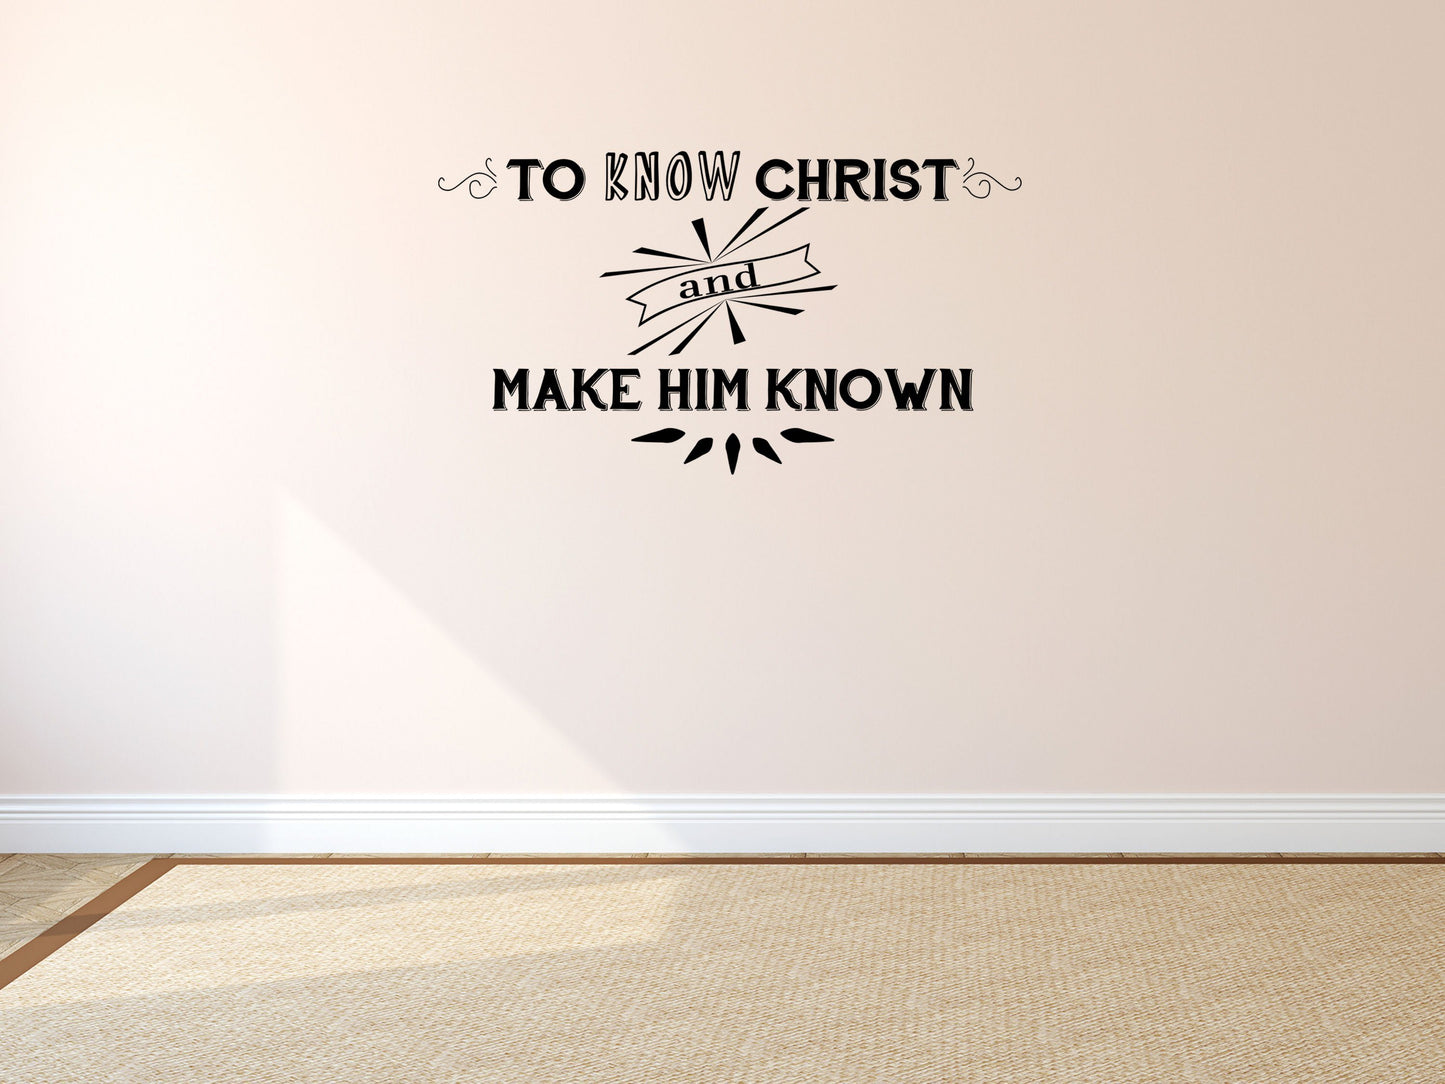 To Know Christ Decal - Know Christ Vinyl Decal - Religious Wall Decals - Inspirational Wall Decor - Make Christ Known Sign Vinyl Wall Decal Done 